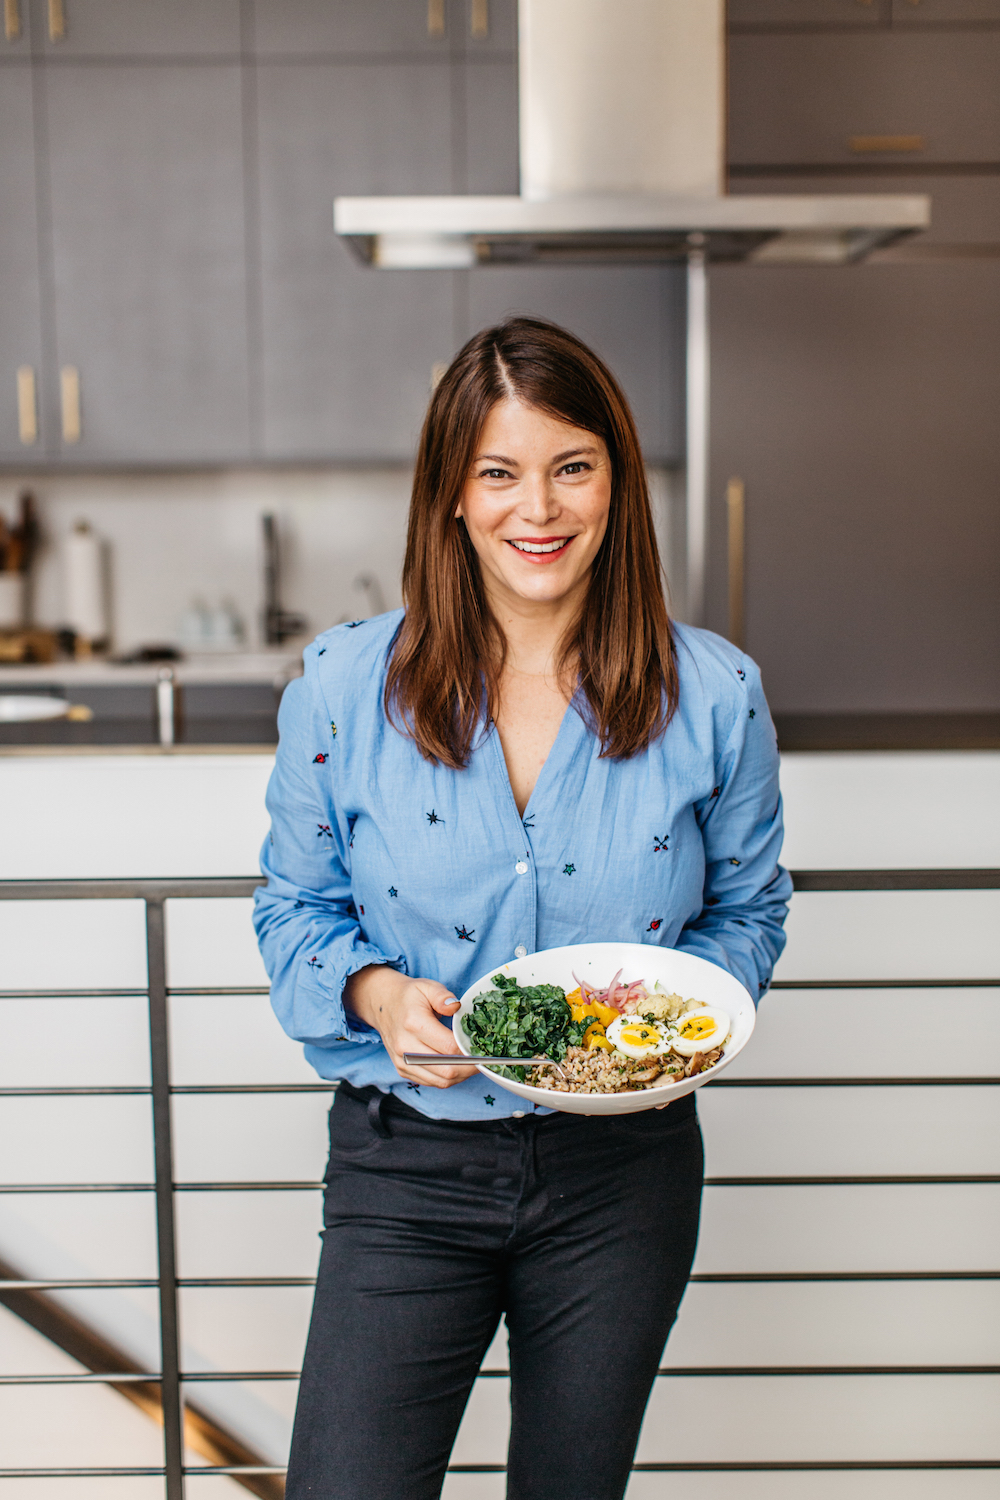 Gail Simmons in the kitchen recipe